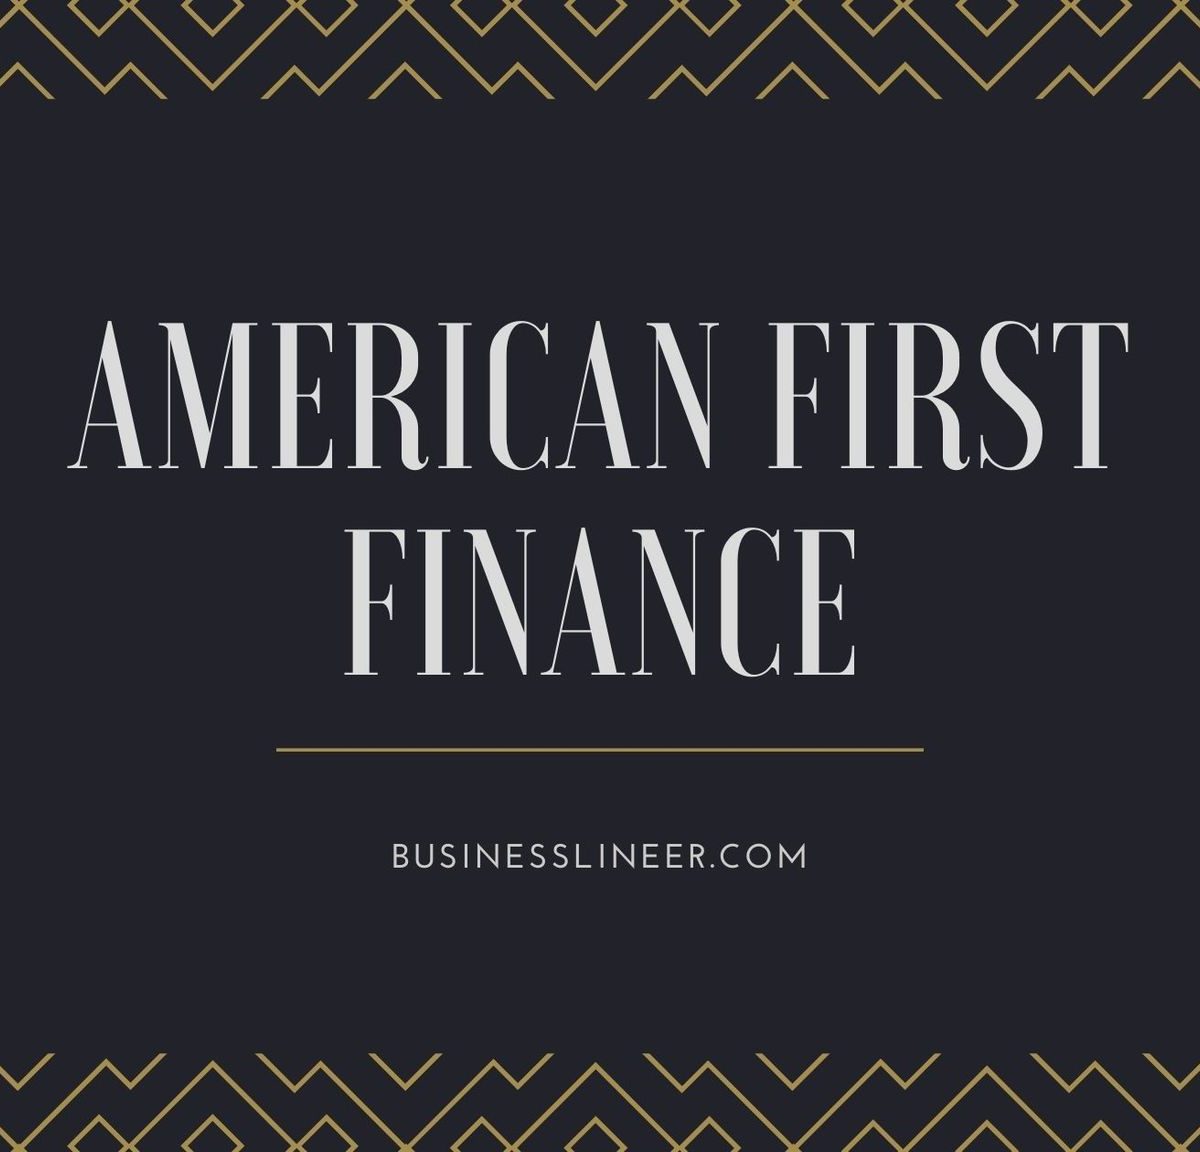 What is American First Finance?